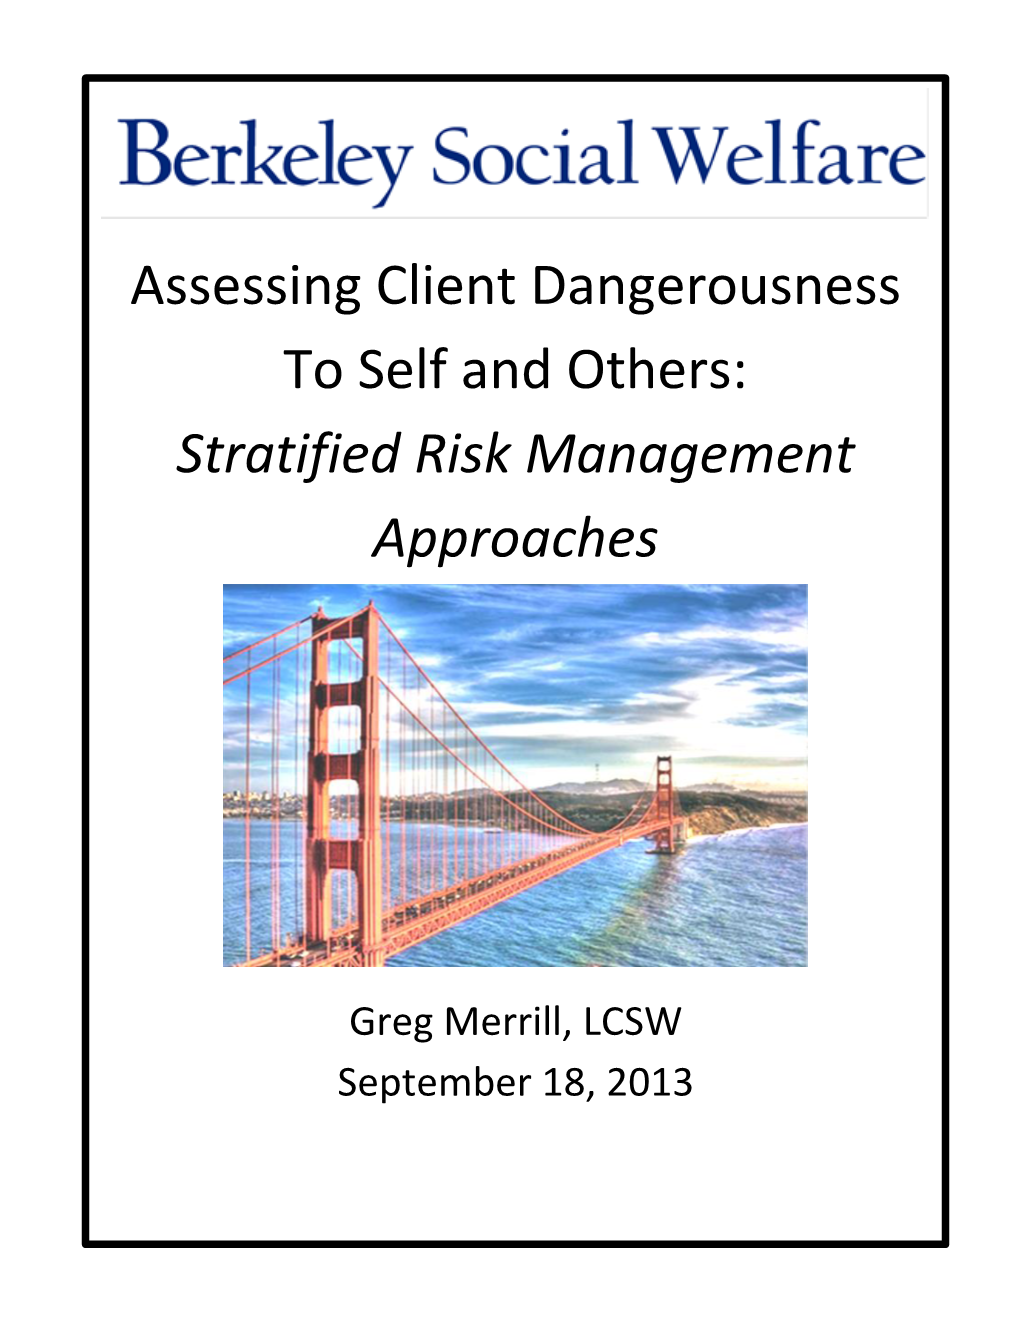 Assessing Client Dangerousness to Self and Others: Stratified Risk